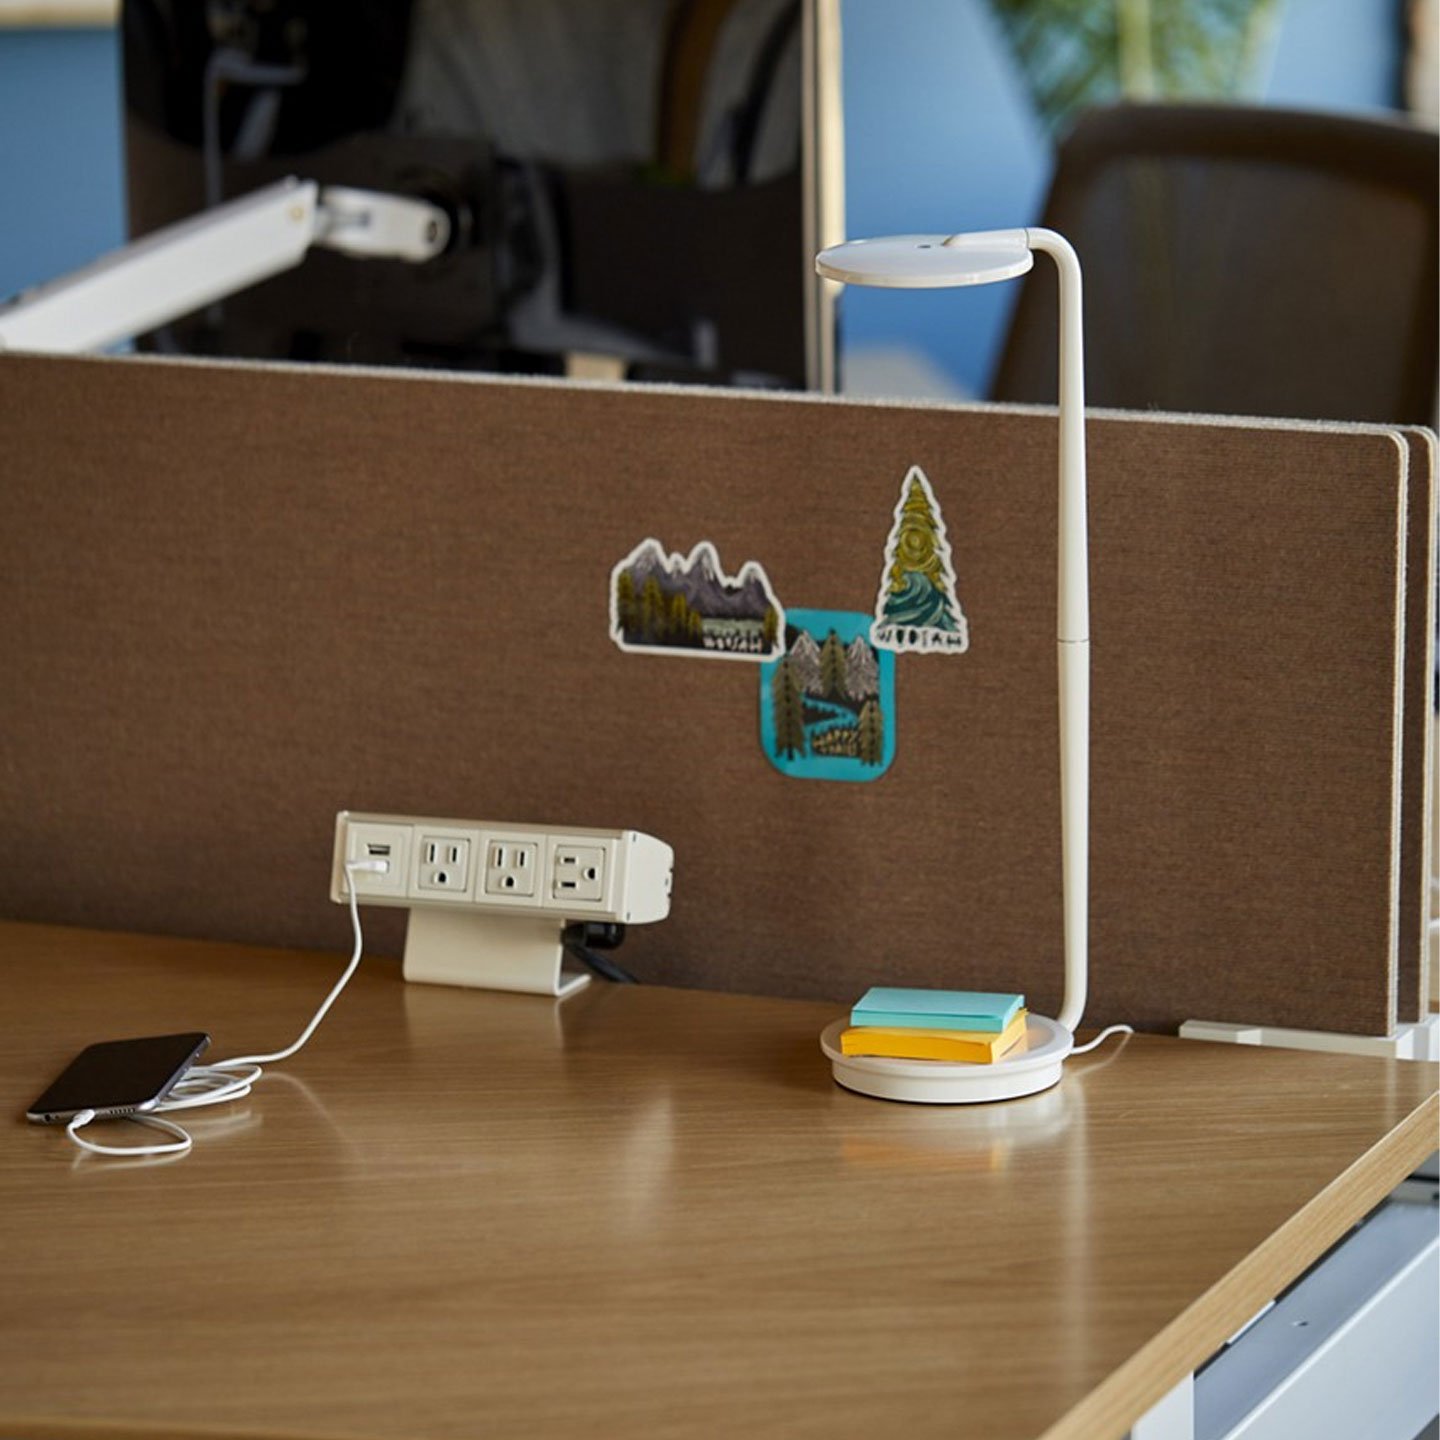 Haworth Belong Screen in etch brown on wood desk with power strip on desk and lamp